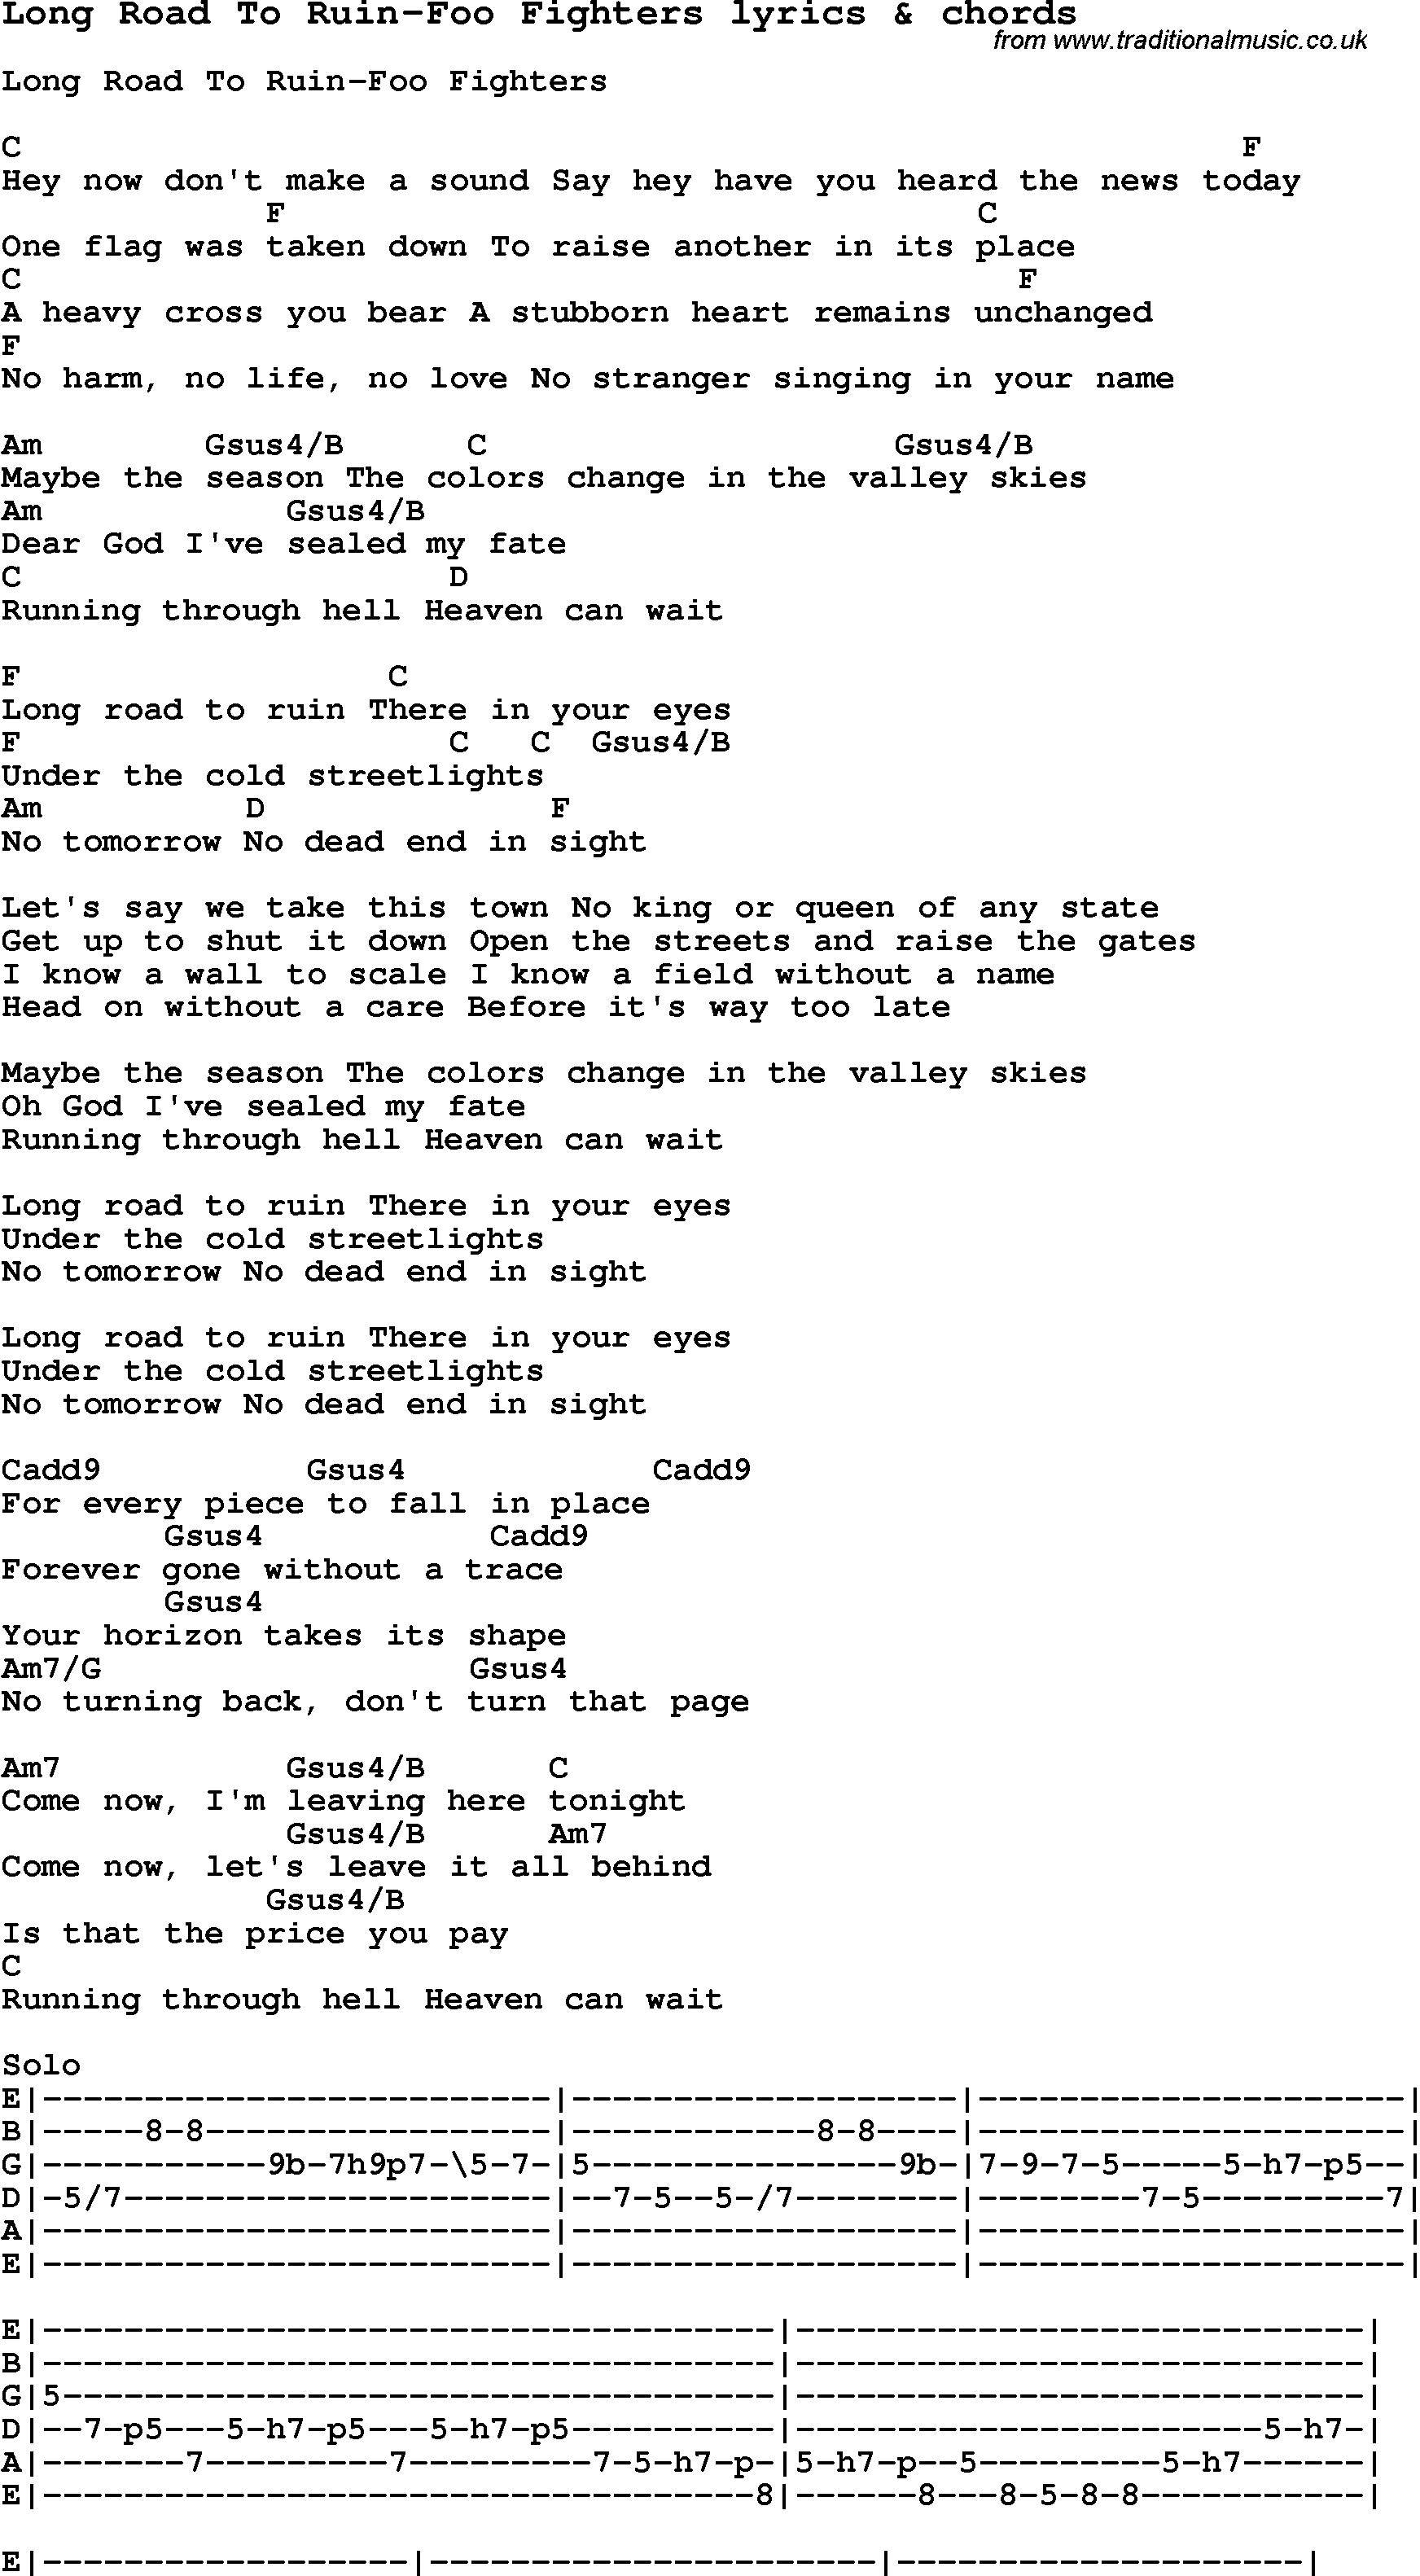 Love Song Lyrics for: Long Road To Ruin-Foo Fighters with chords for Ukulele, Guitar Banjo etc.